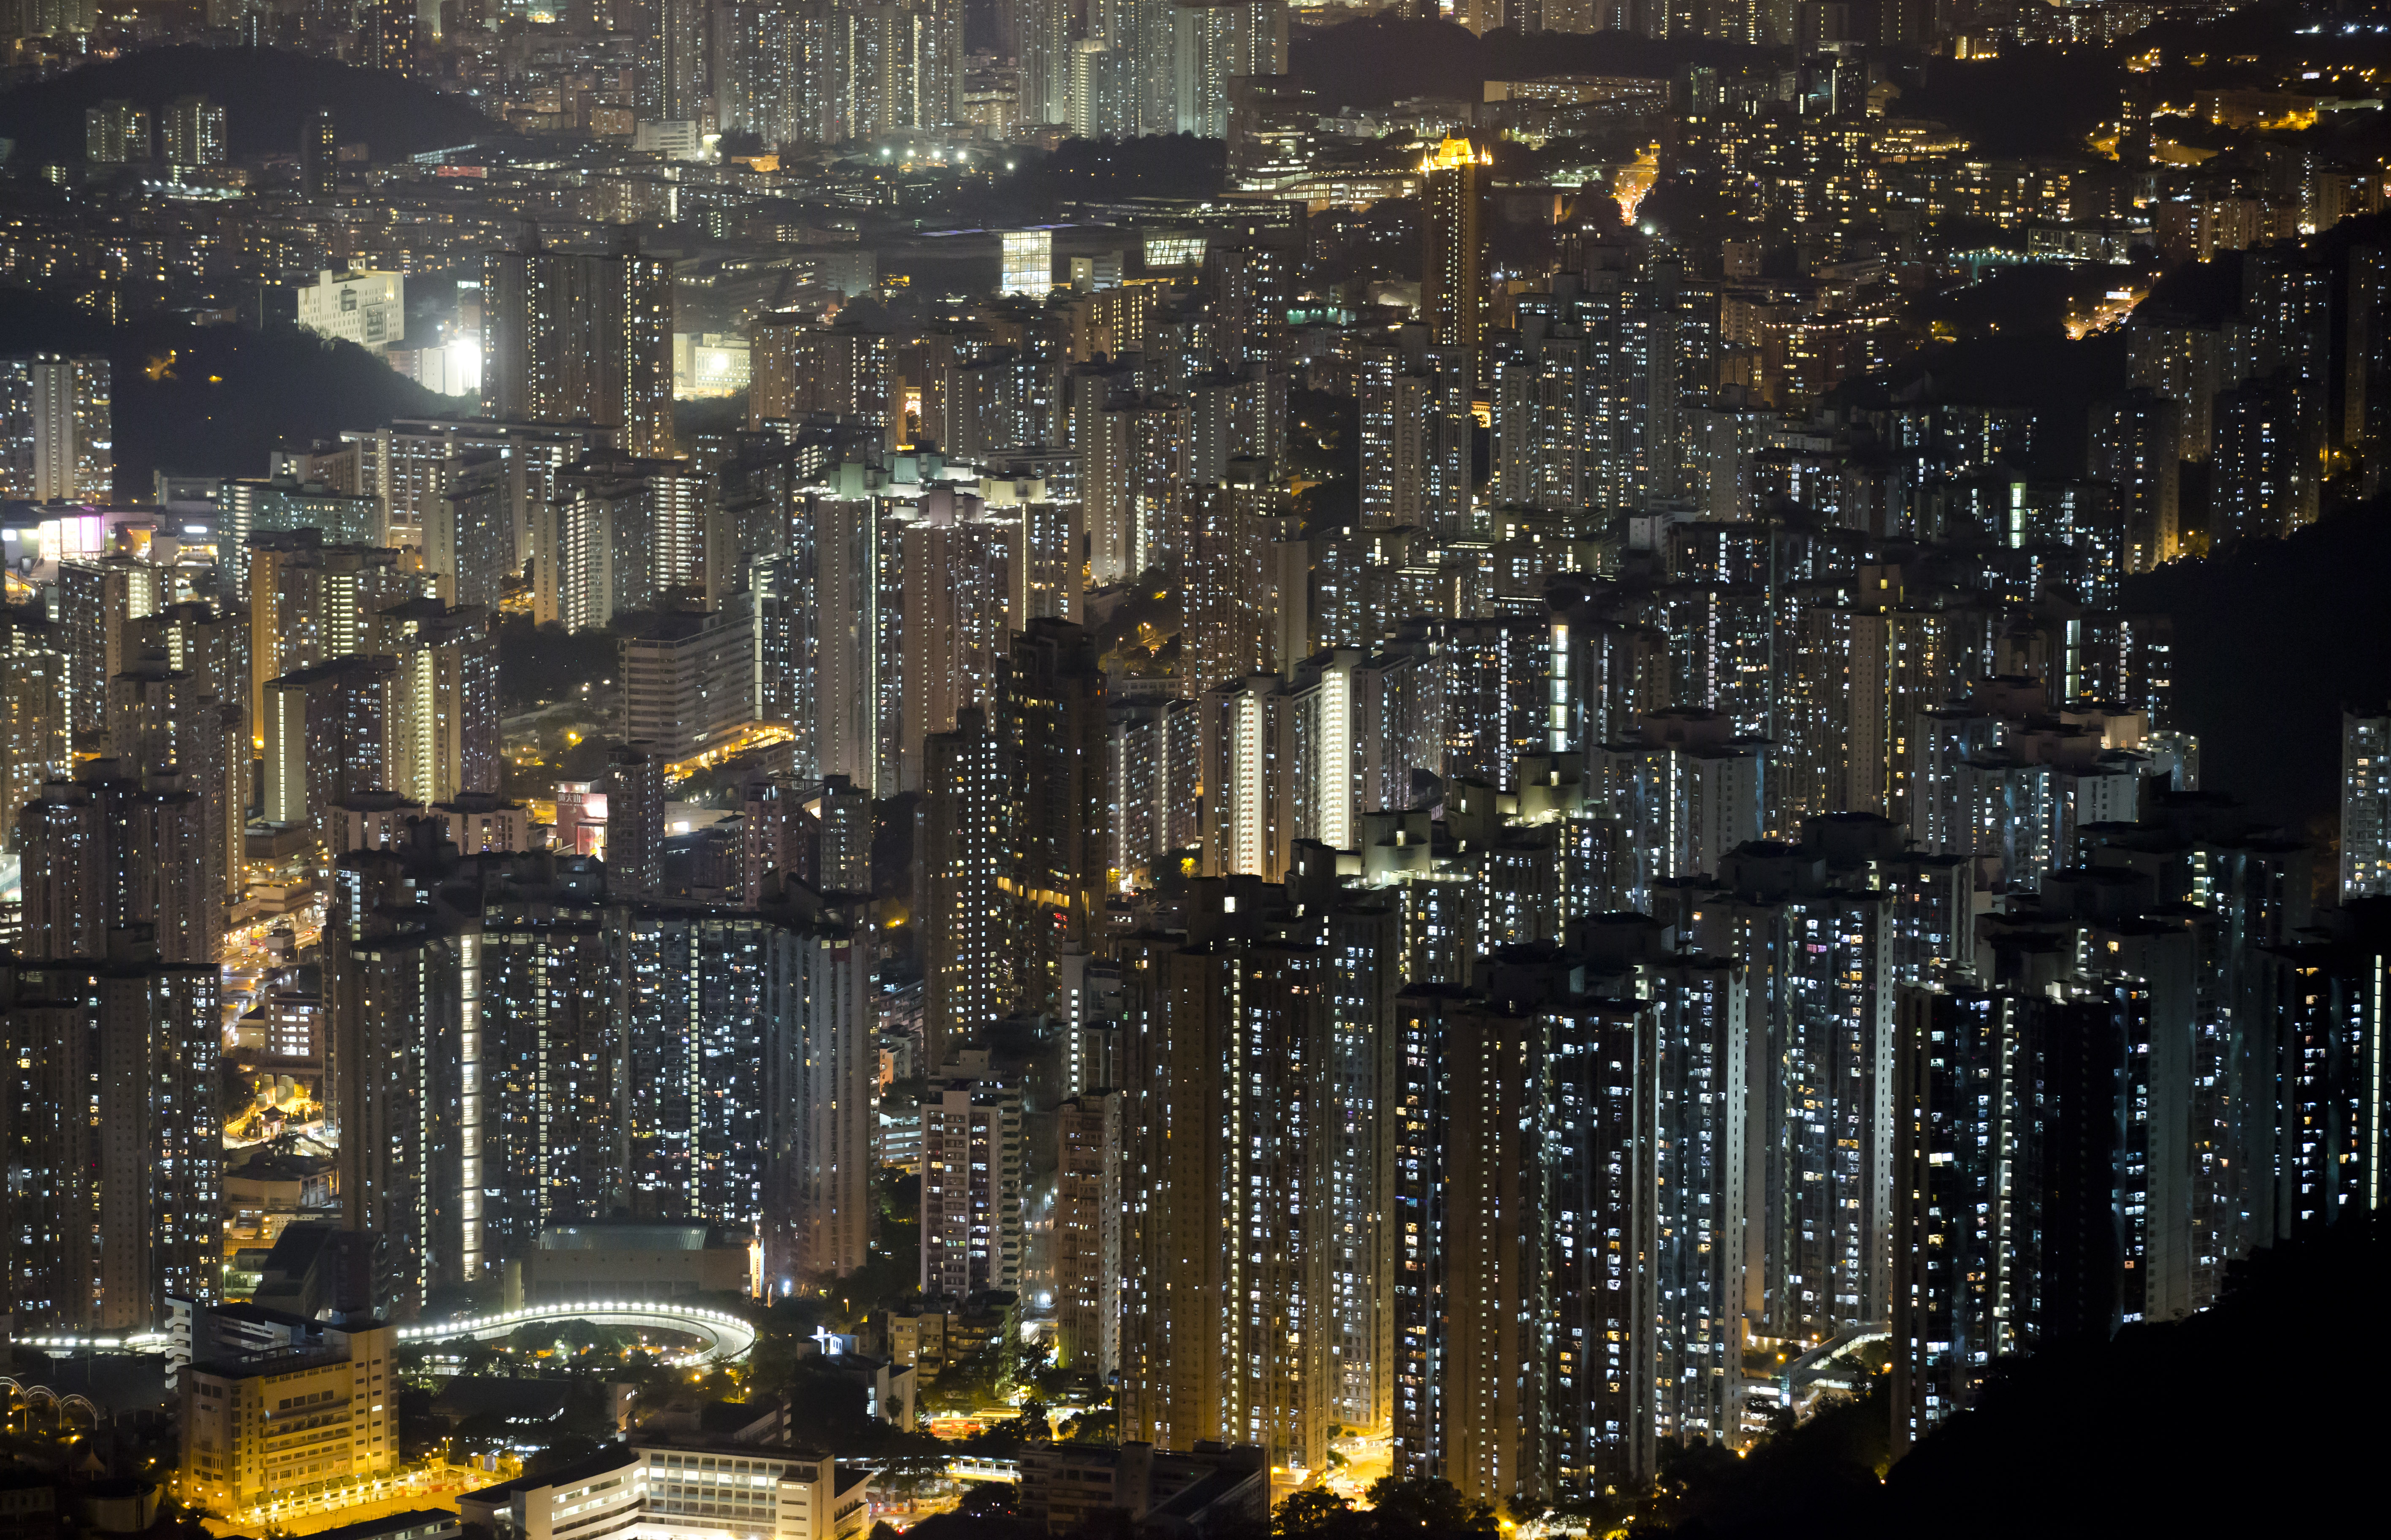 This Nov. 27, 2015 photo shows apartment buildings in Hong Kong. In tightly-packed Hong Kong, the dead are causing a problem for the living. Limited land to build on and soaring property prices mean Hong Kong is fast running out of space to store the dead. (AP Photo/Kin Cheung)